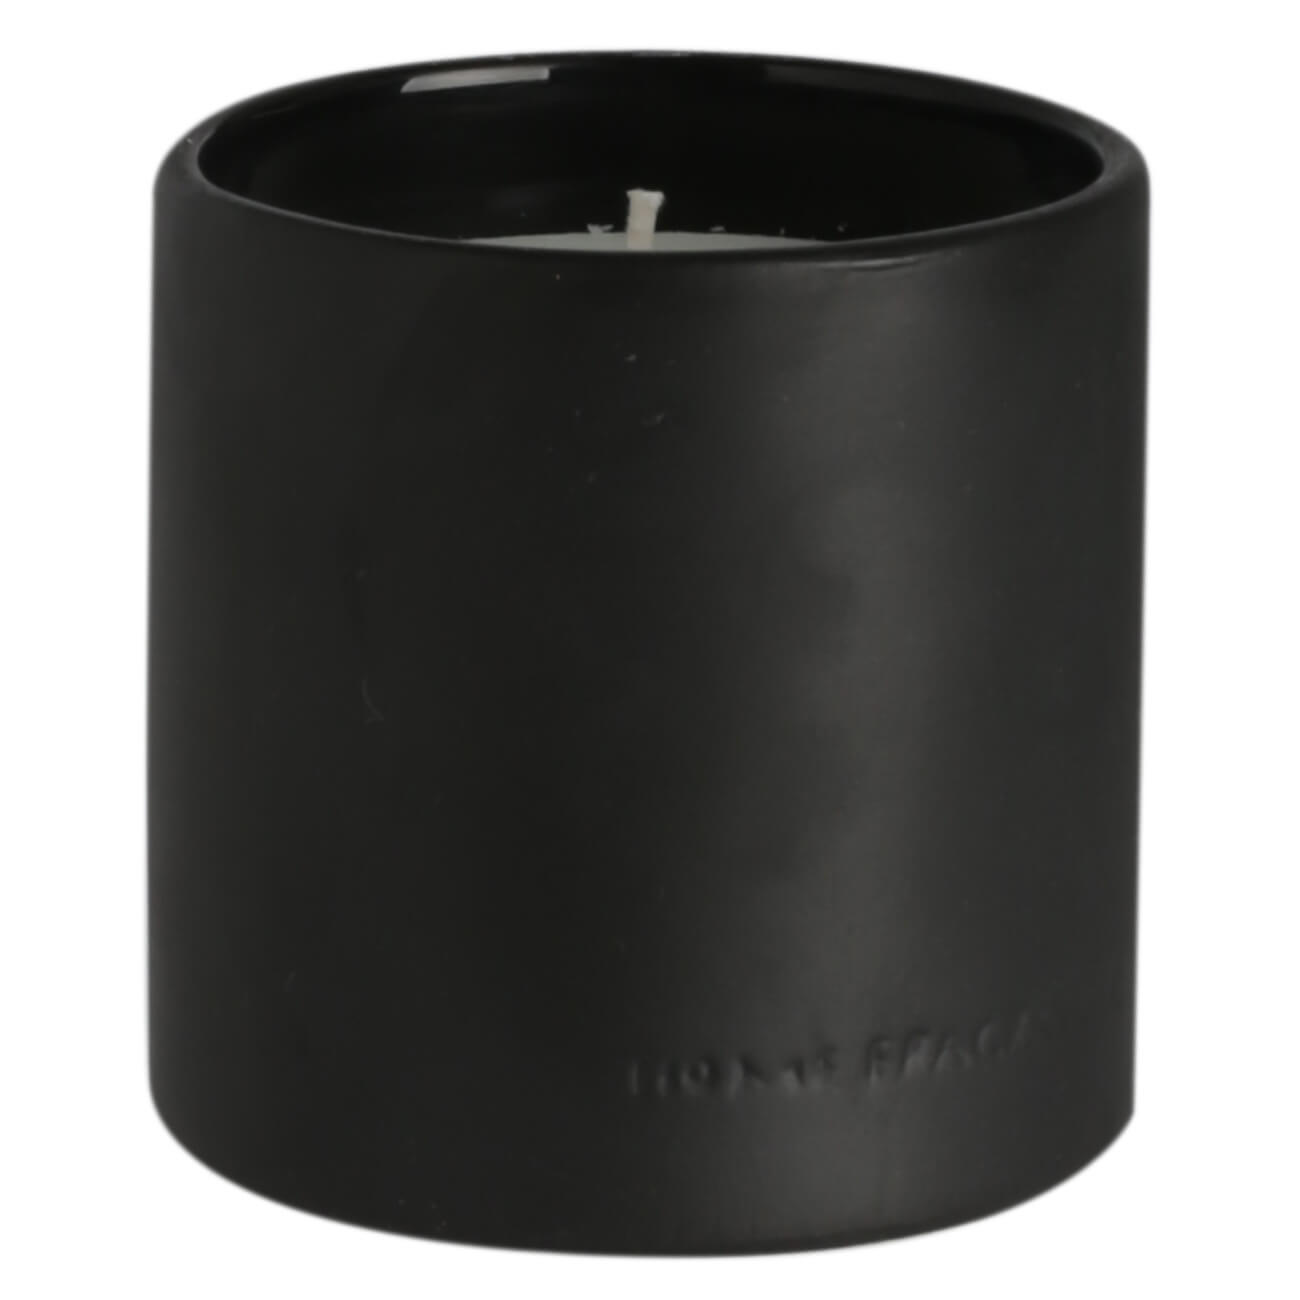 Scented candle, 9 cm, in a candle holder, ceramic, black, Black forest, B&W изображение № 1